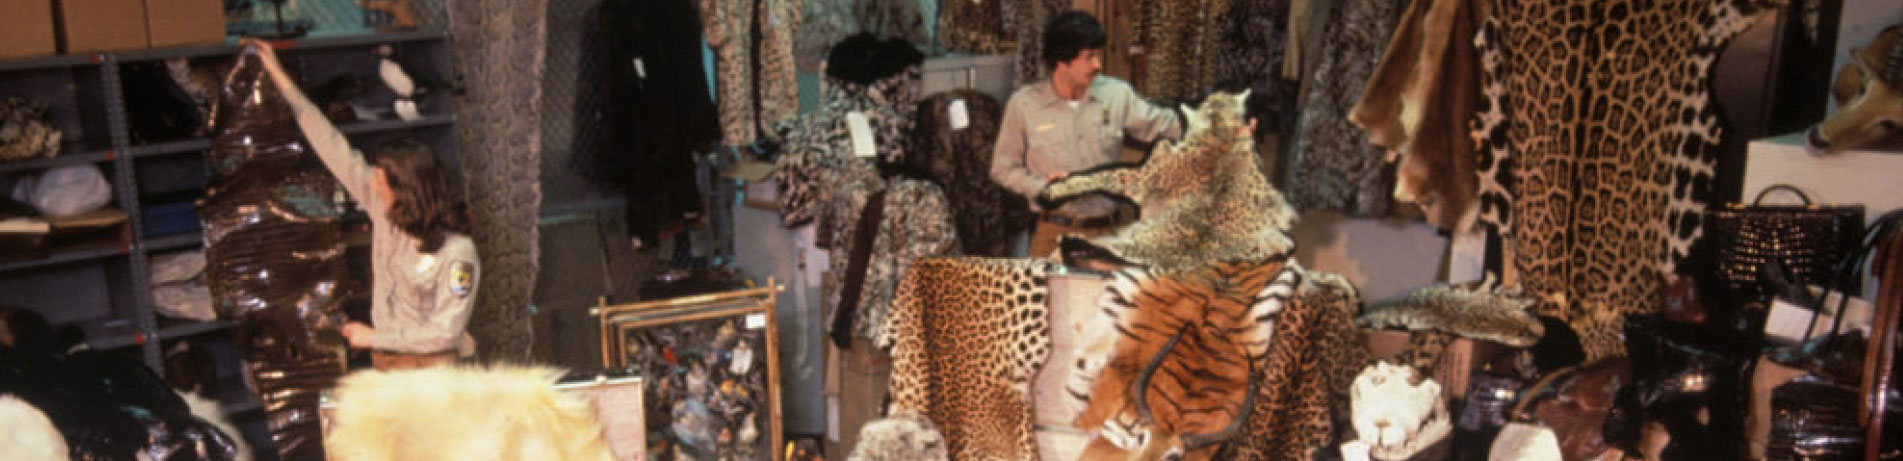 Officials handling confiscated wildlife items including tiger and leopard skins